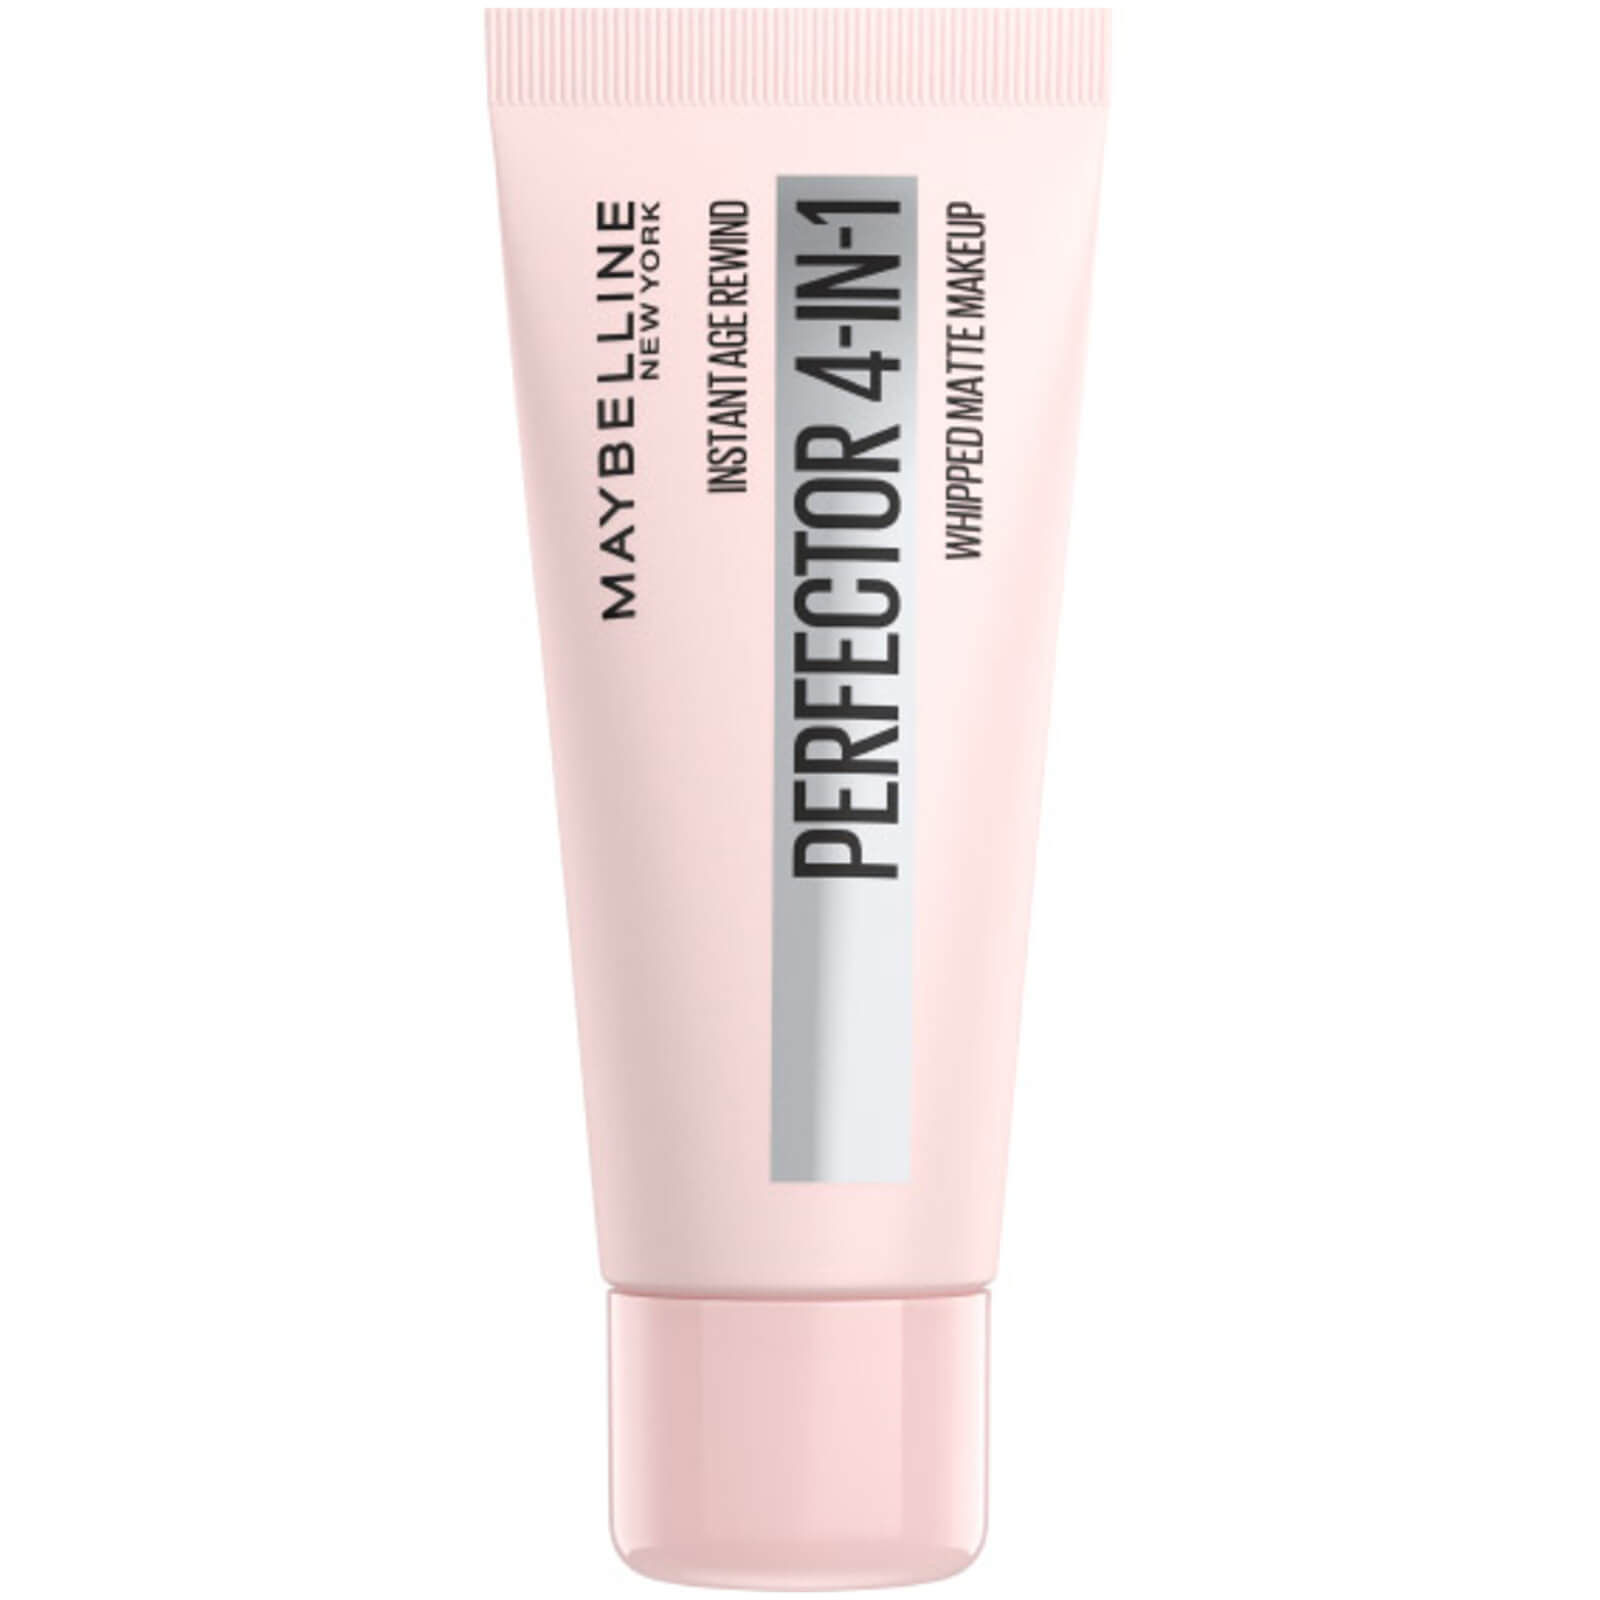 Maybelline Instant Age Rewind Instant Perfector 4-in-1 20ml (Various Shades) - Light Medium